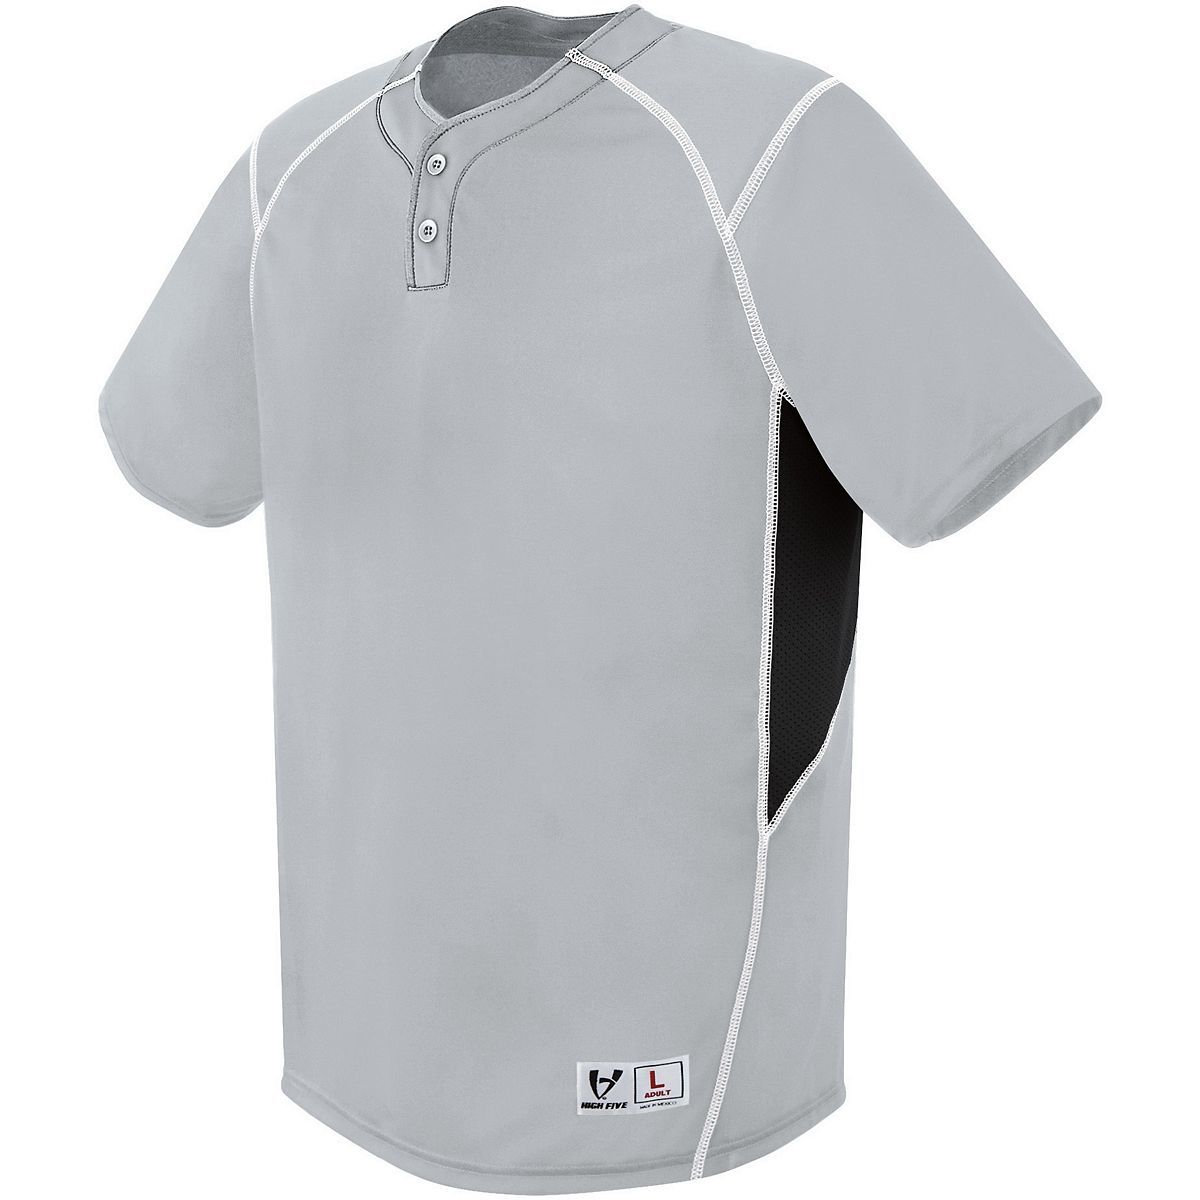 Augusta Sportswear Youth Bandit Two-Button Jersey in Silver Grey/Black/White  -Part of the Youth, Youth-Jersey, Augusta-Products, Baseball, Shirts, All-Sports, All-Sports-1 product lines at KanaleyCreations.com